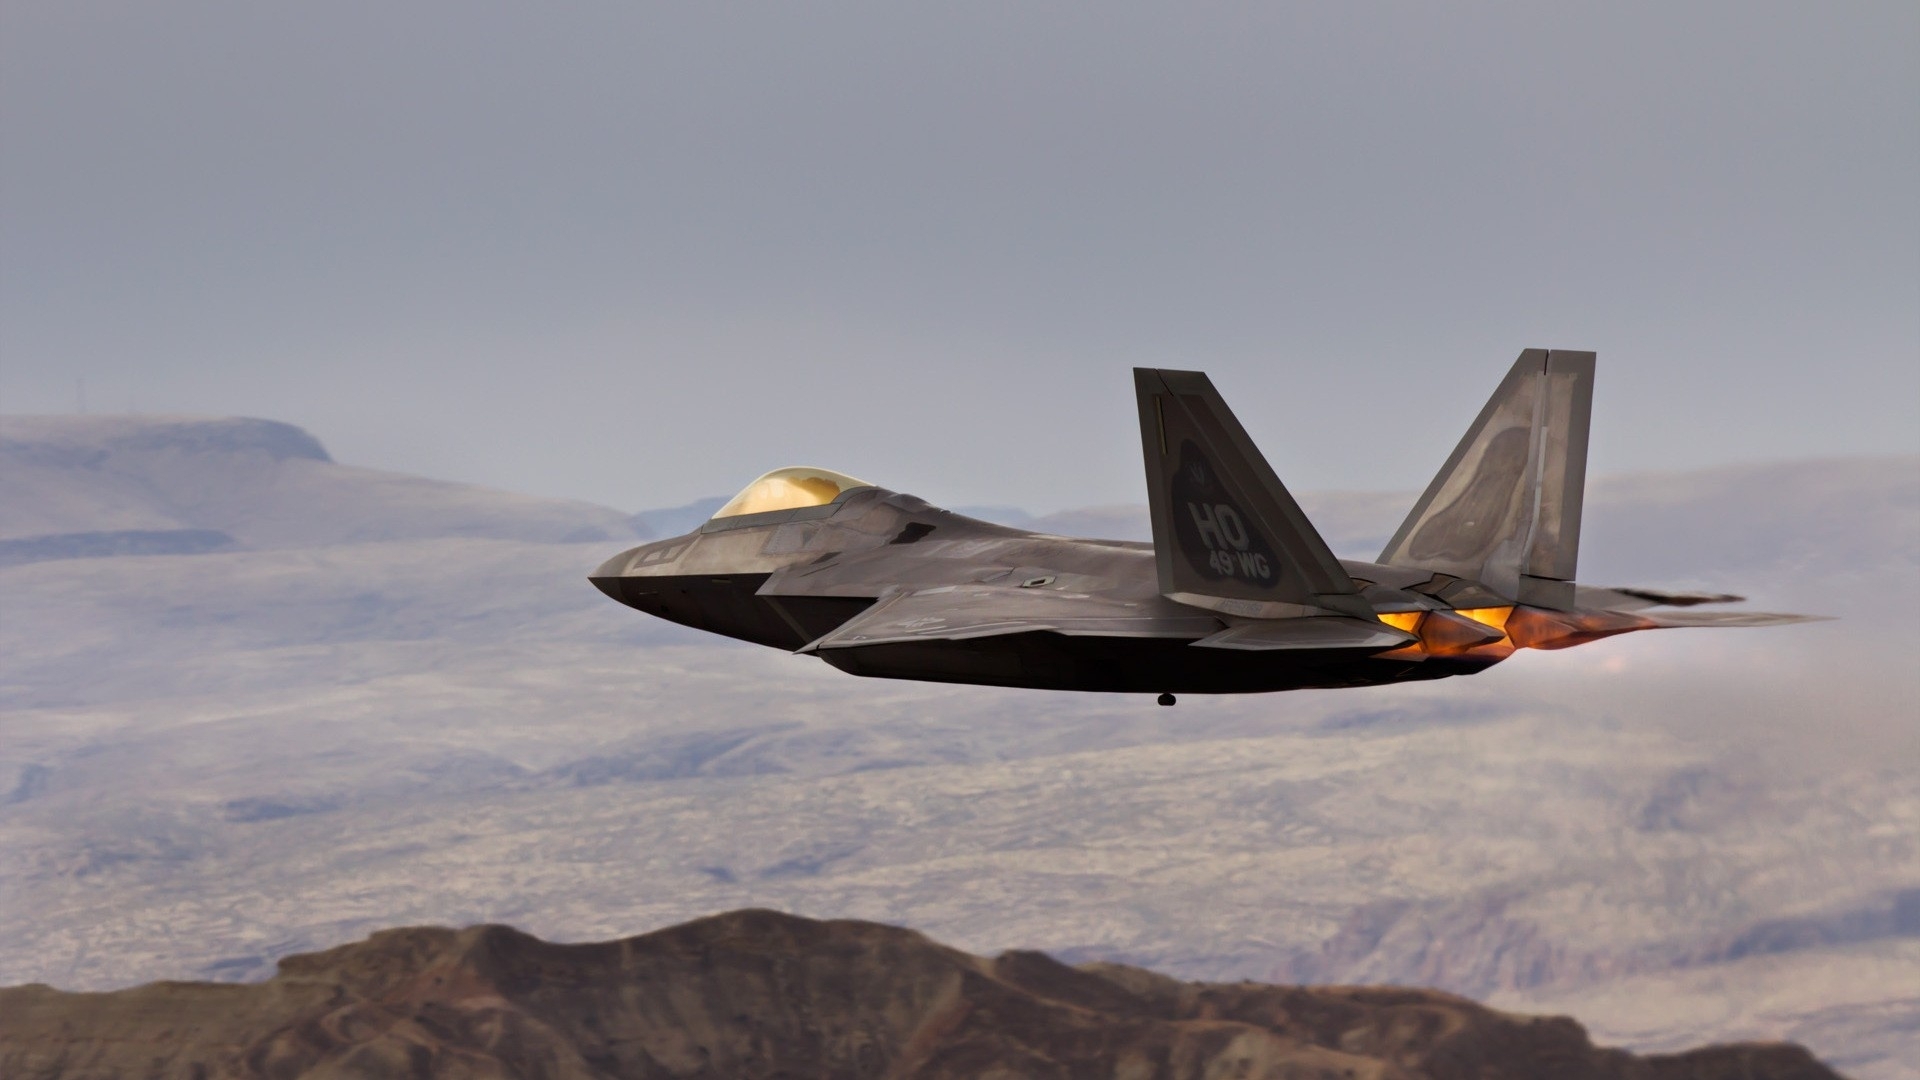 f 22, Vehicles, Aircraft, Airplane, Plane, Weapon, Military, Air, Force, Flight, Mountains, Landscape Wallpaper